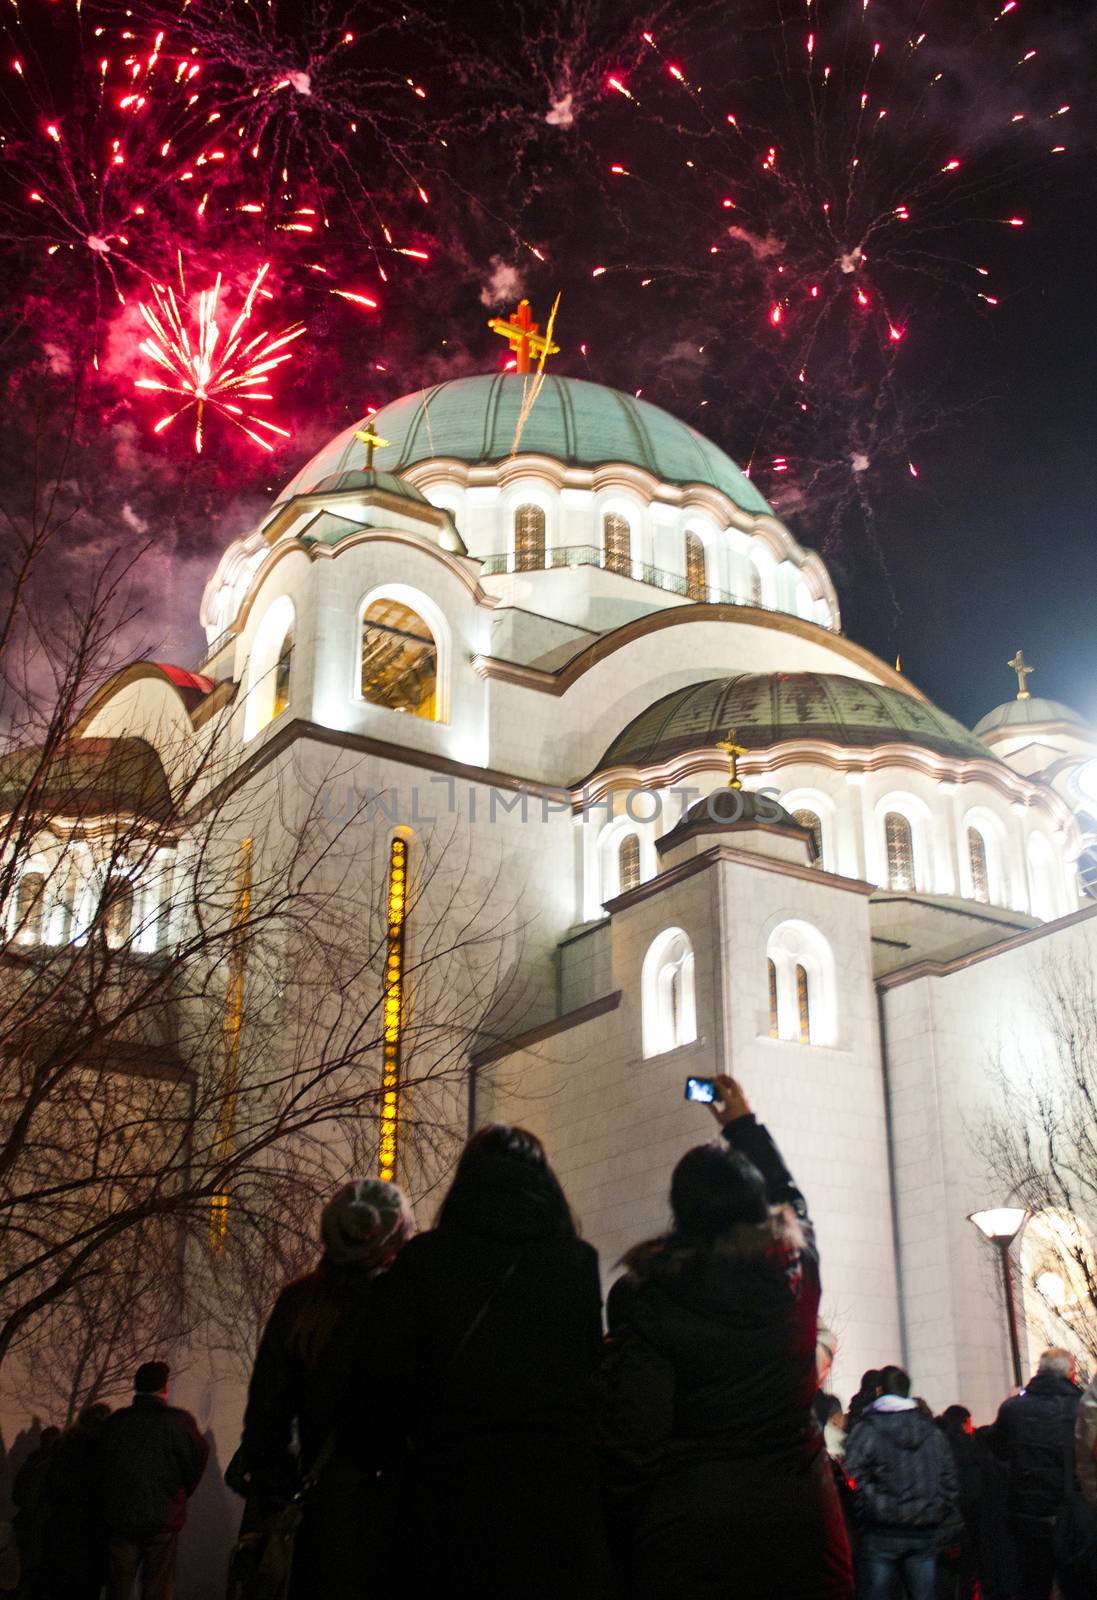 BELGRADE - JANUARY 13: Serbian New years eve celebration in front of the St. Sava's temple with fireworks at midnight in Belgrade, Serbia on January 13, 2013